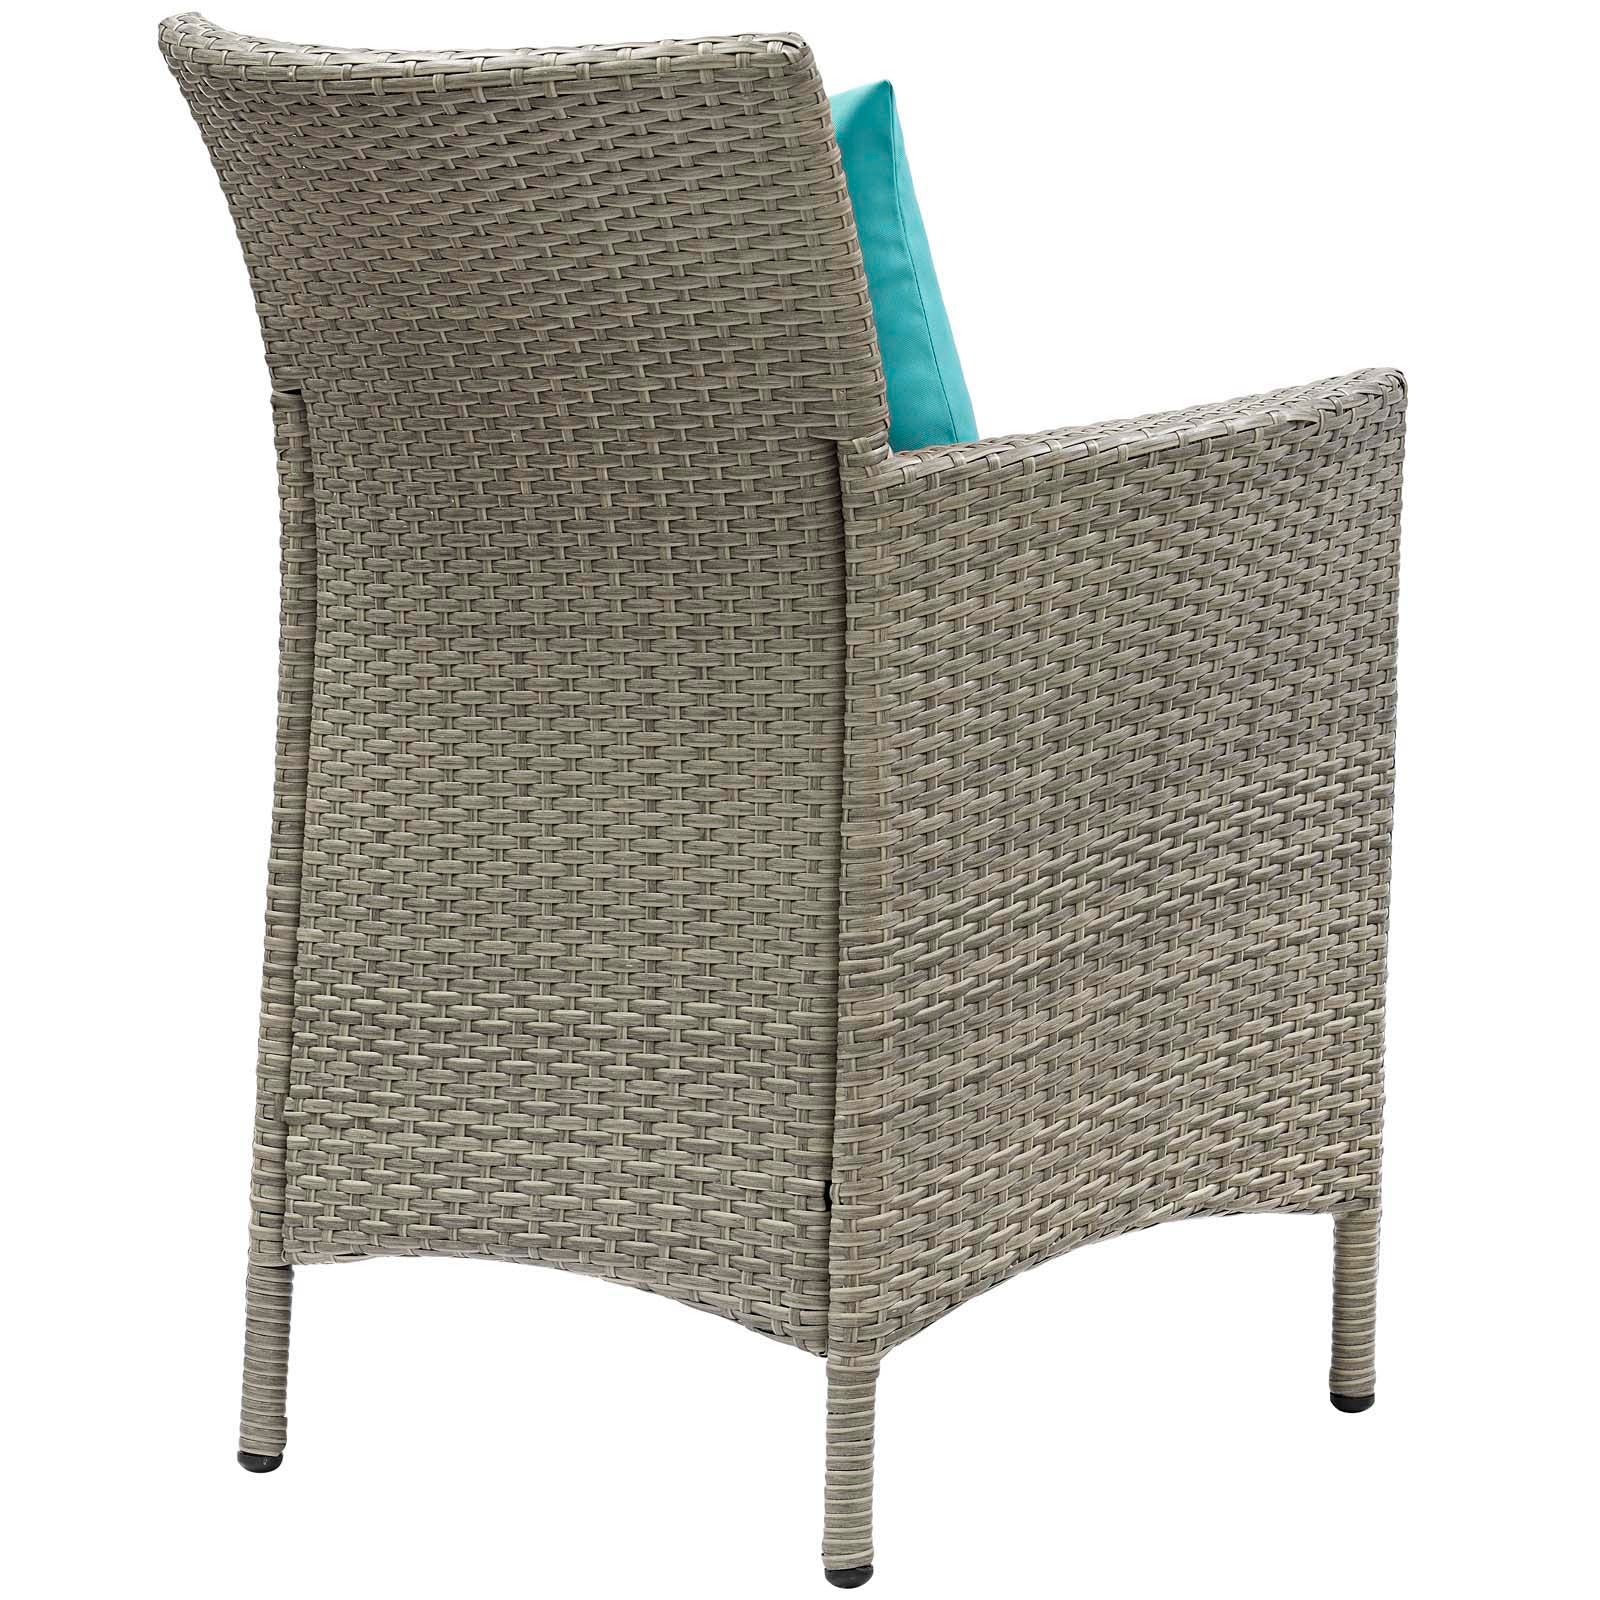 Modway Outdoor Dining Chairs - Conduit Outdoor Patio Wicker Rattan Dining Armchair Set of 2 Light Gray Turquoise